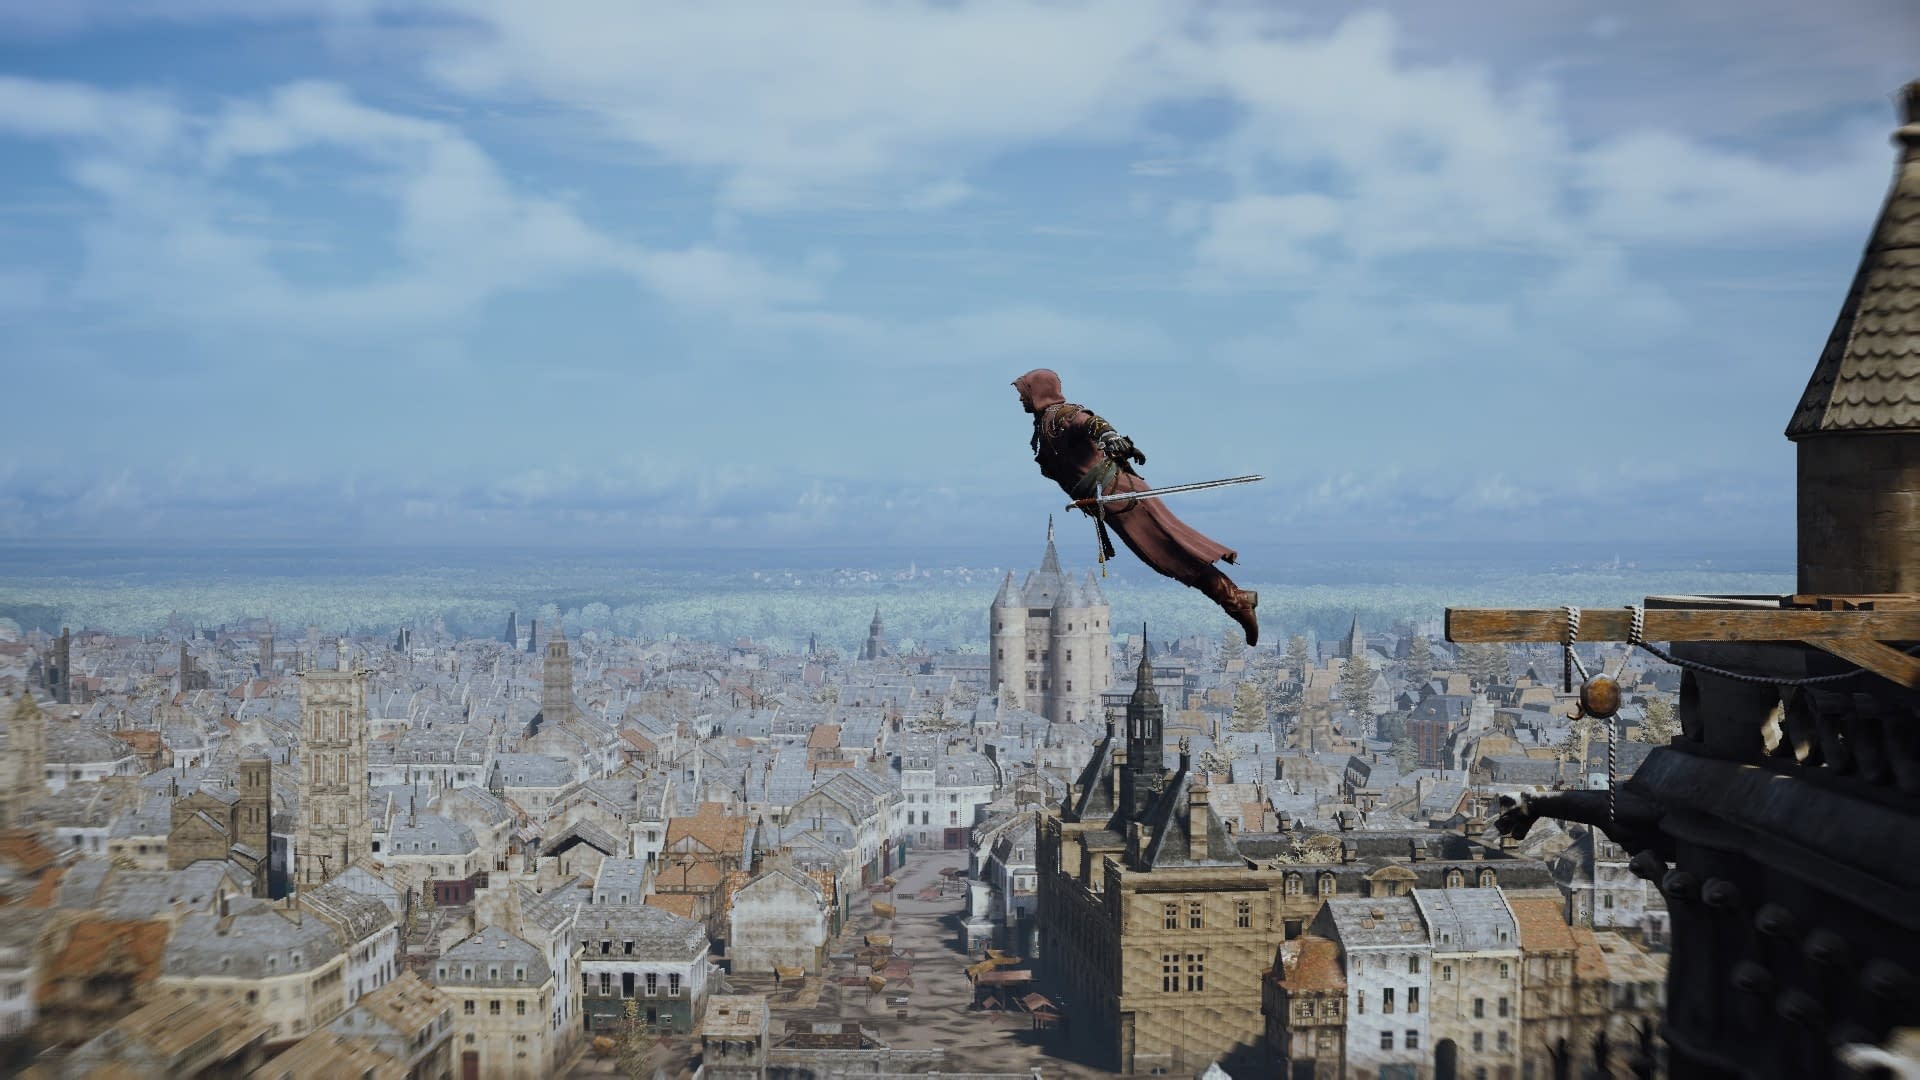 Assassin’s Realistic Fabric Physics Mode for Creed Unity Published: Wind Effect